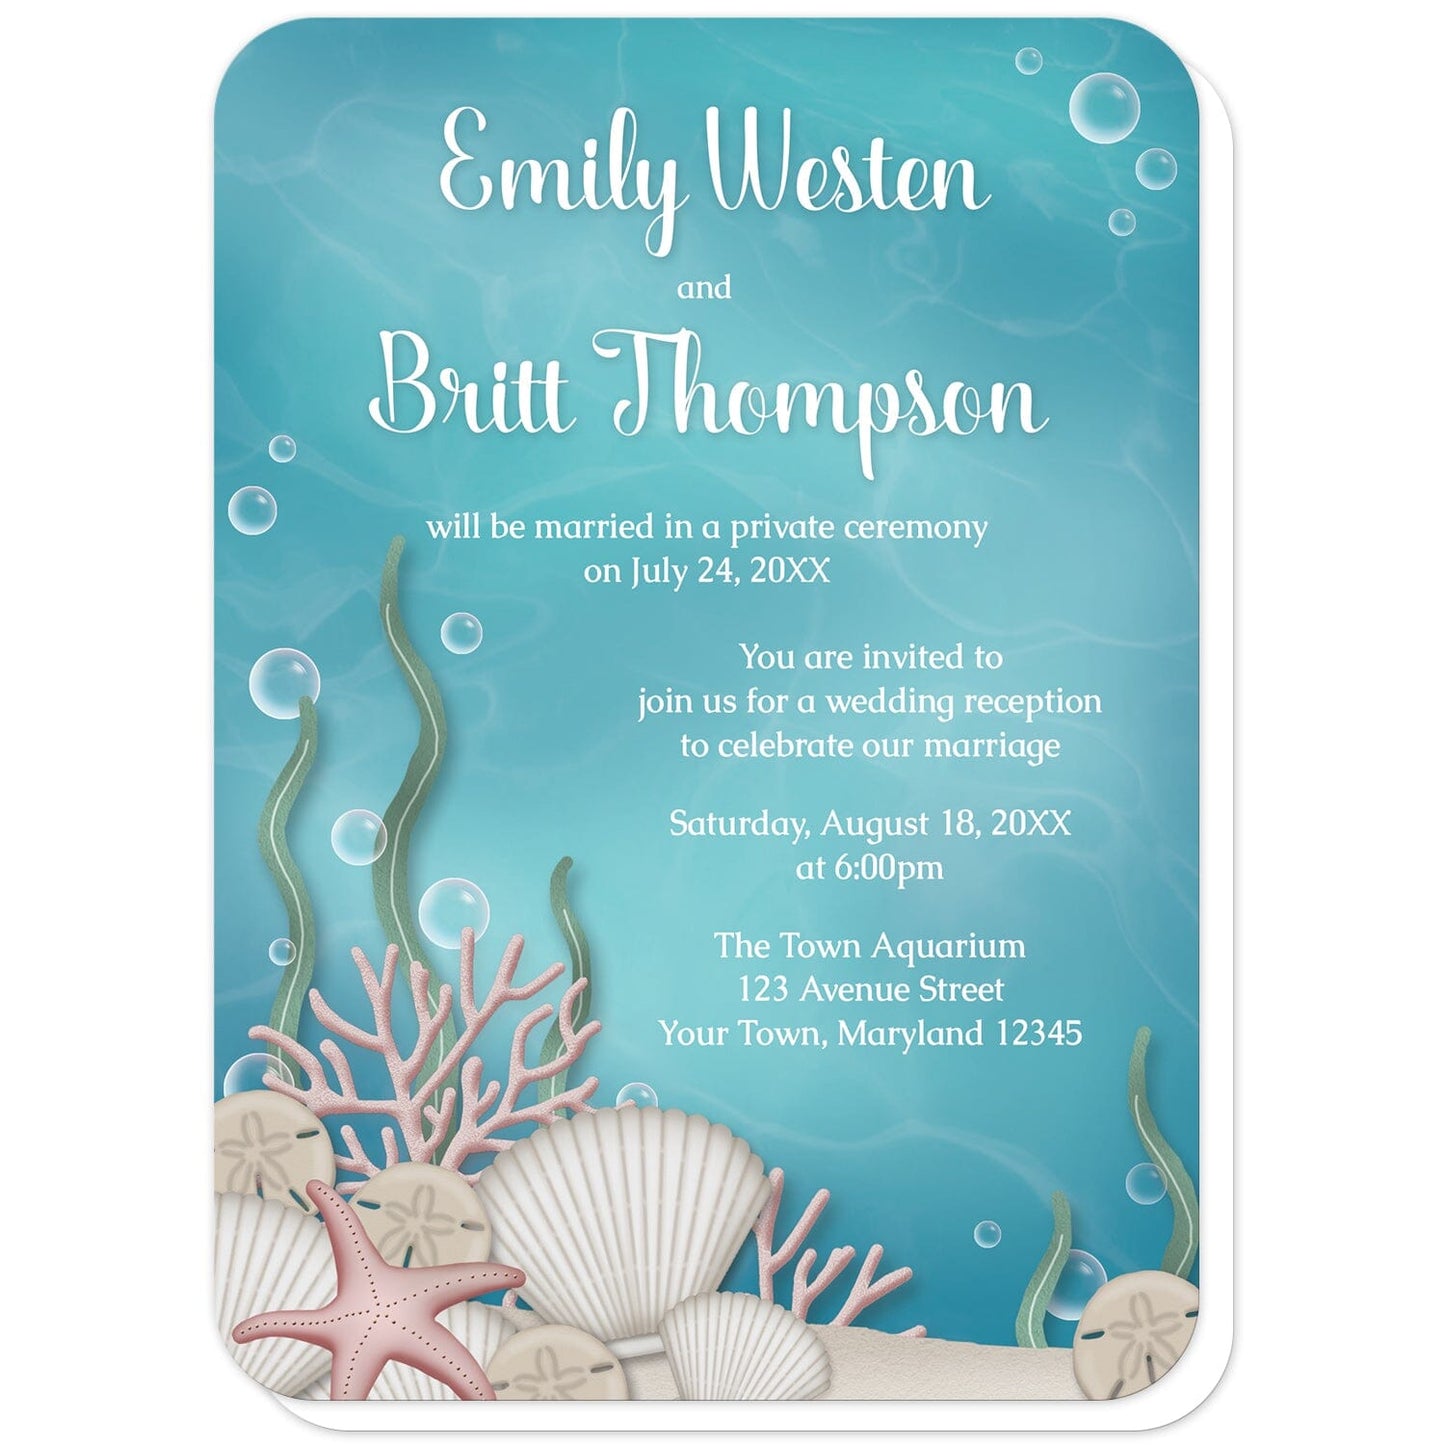 Whimsical Under the Sea Reception Only Invitations (with rounded corners) at Artistically Invited. Uniquely illustrated whimsical under the sea reception only invitations designed with a sandy seabed, assorted seashells, coral, kelp, and little bubbles over an aqua blue water background. Your personalized post-wedding reception details are custom printed in white over the underwater background.